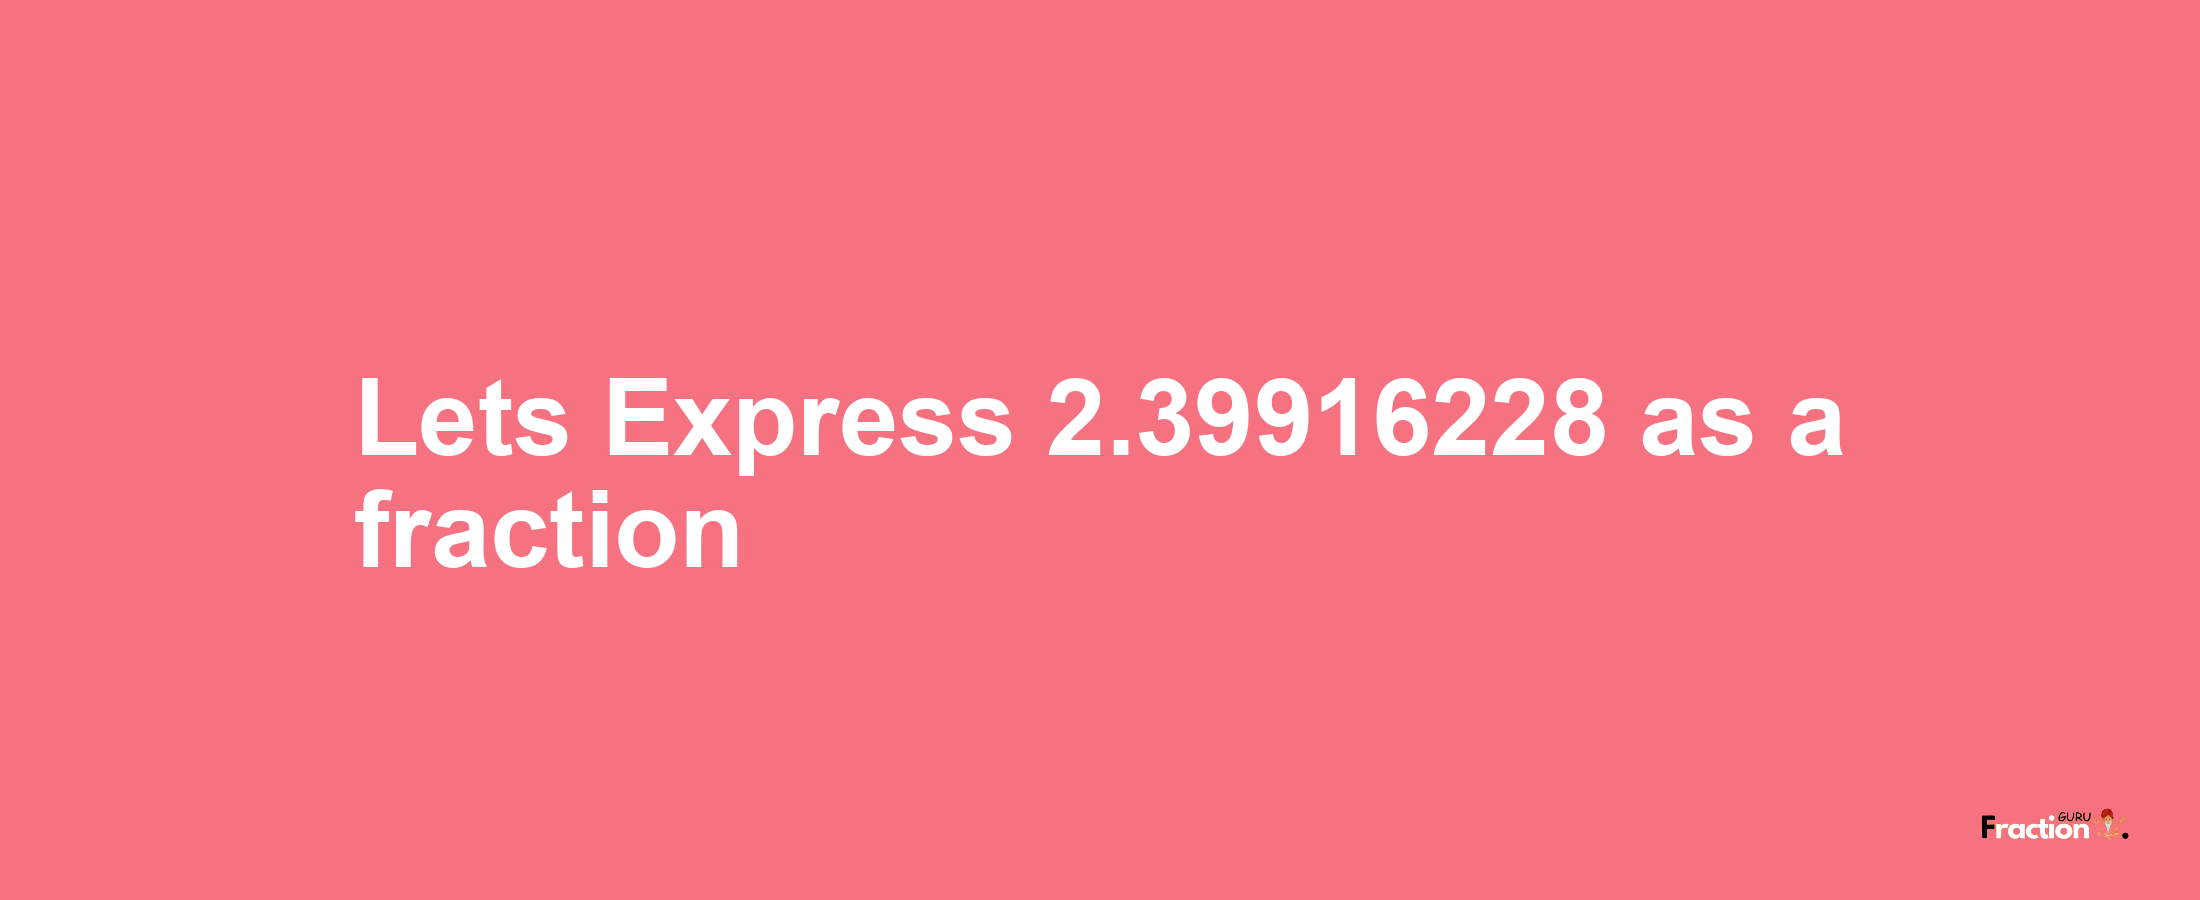 Lets Express 2.39916228 as afraction